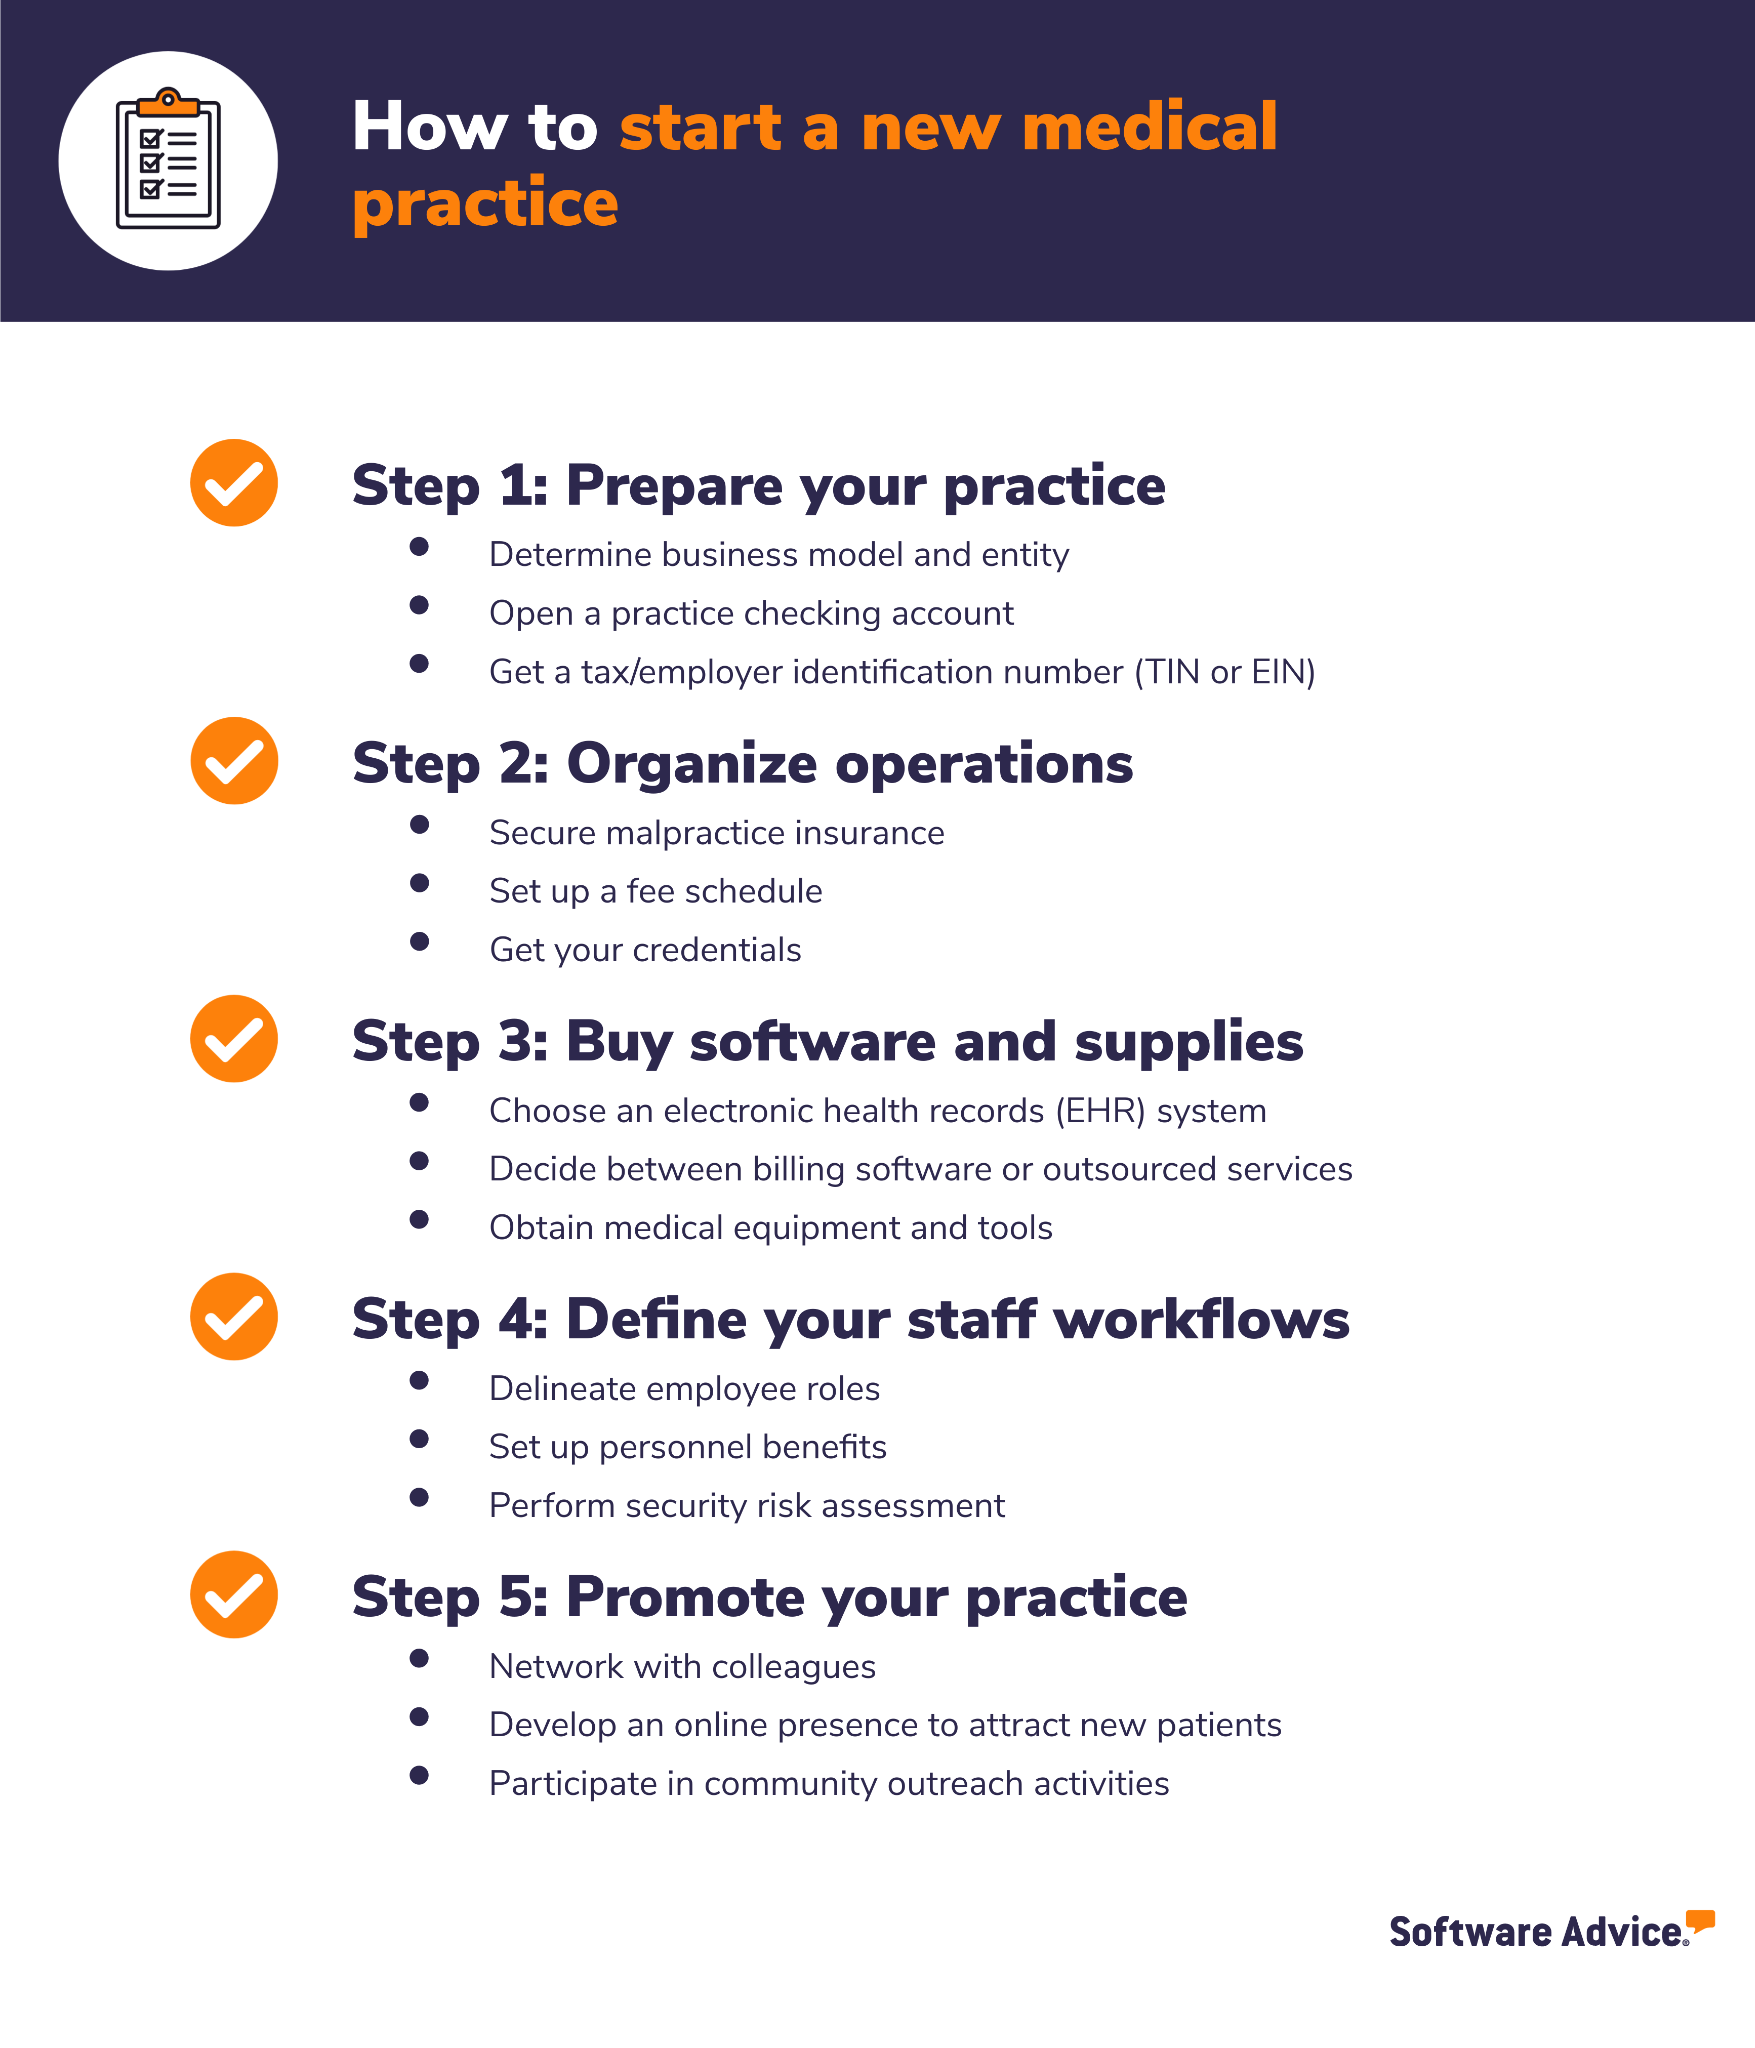 How-to-start-a-medical-practice-checklist